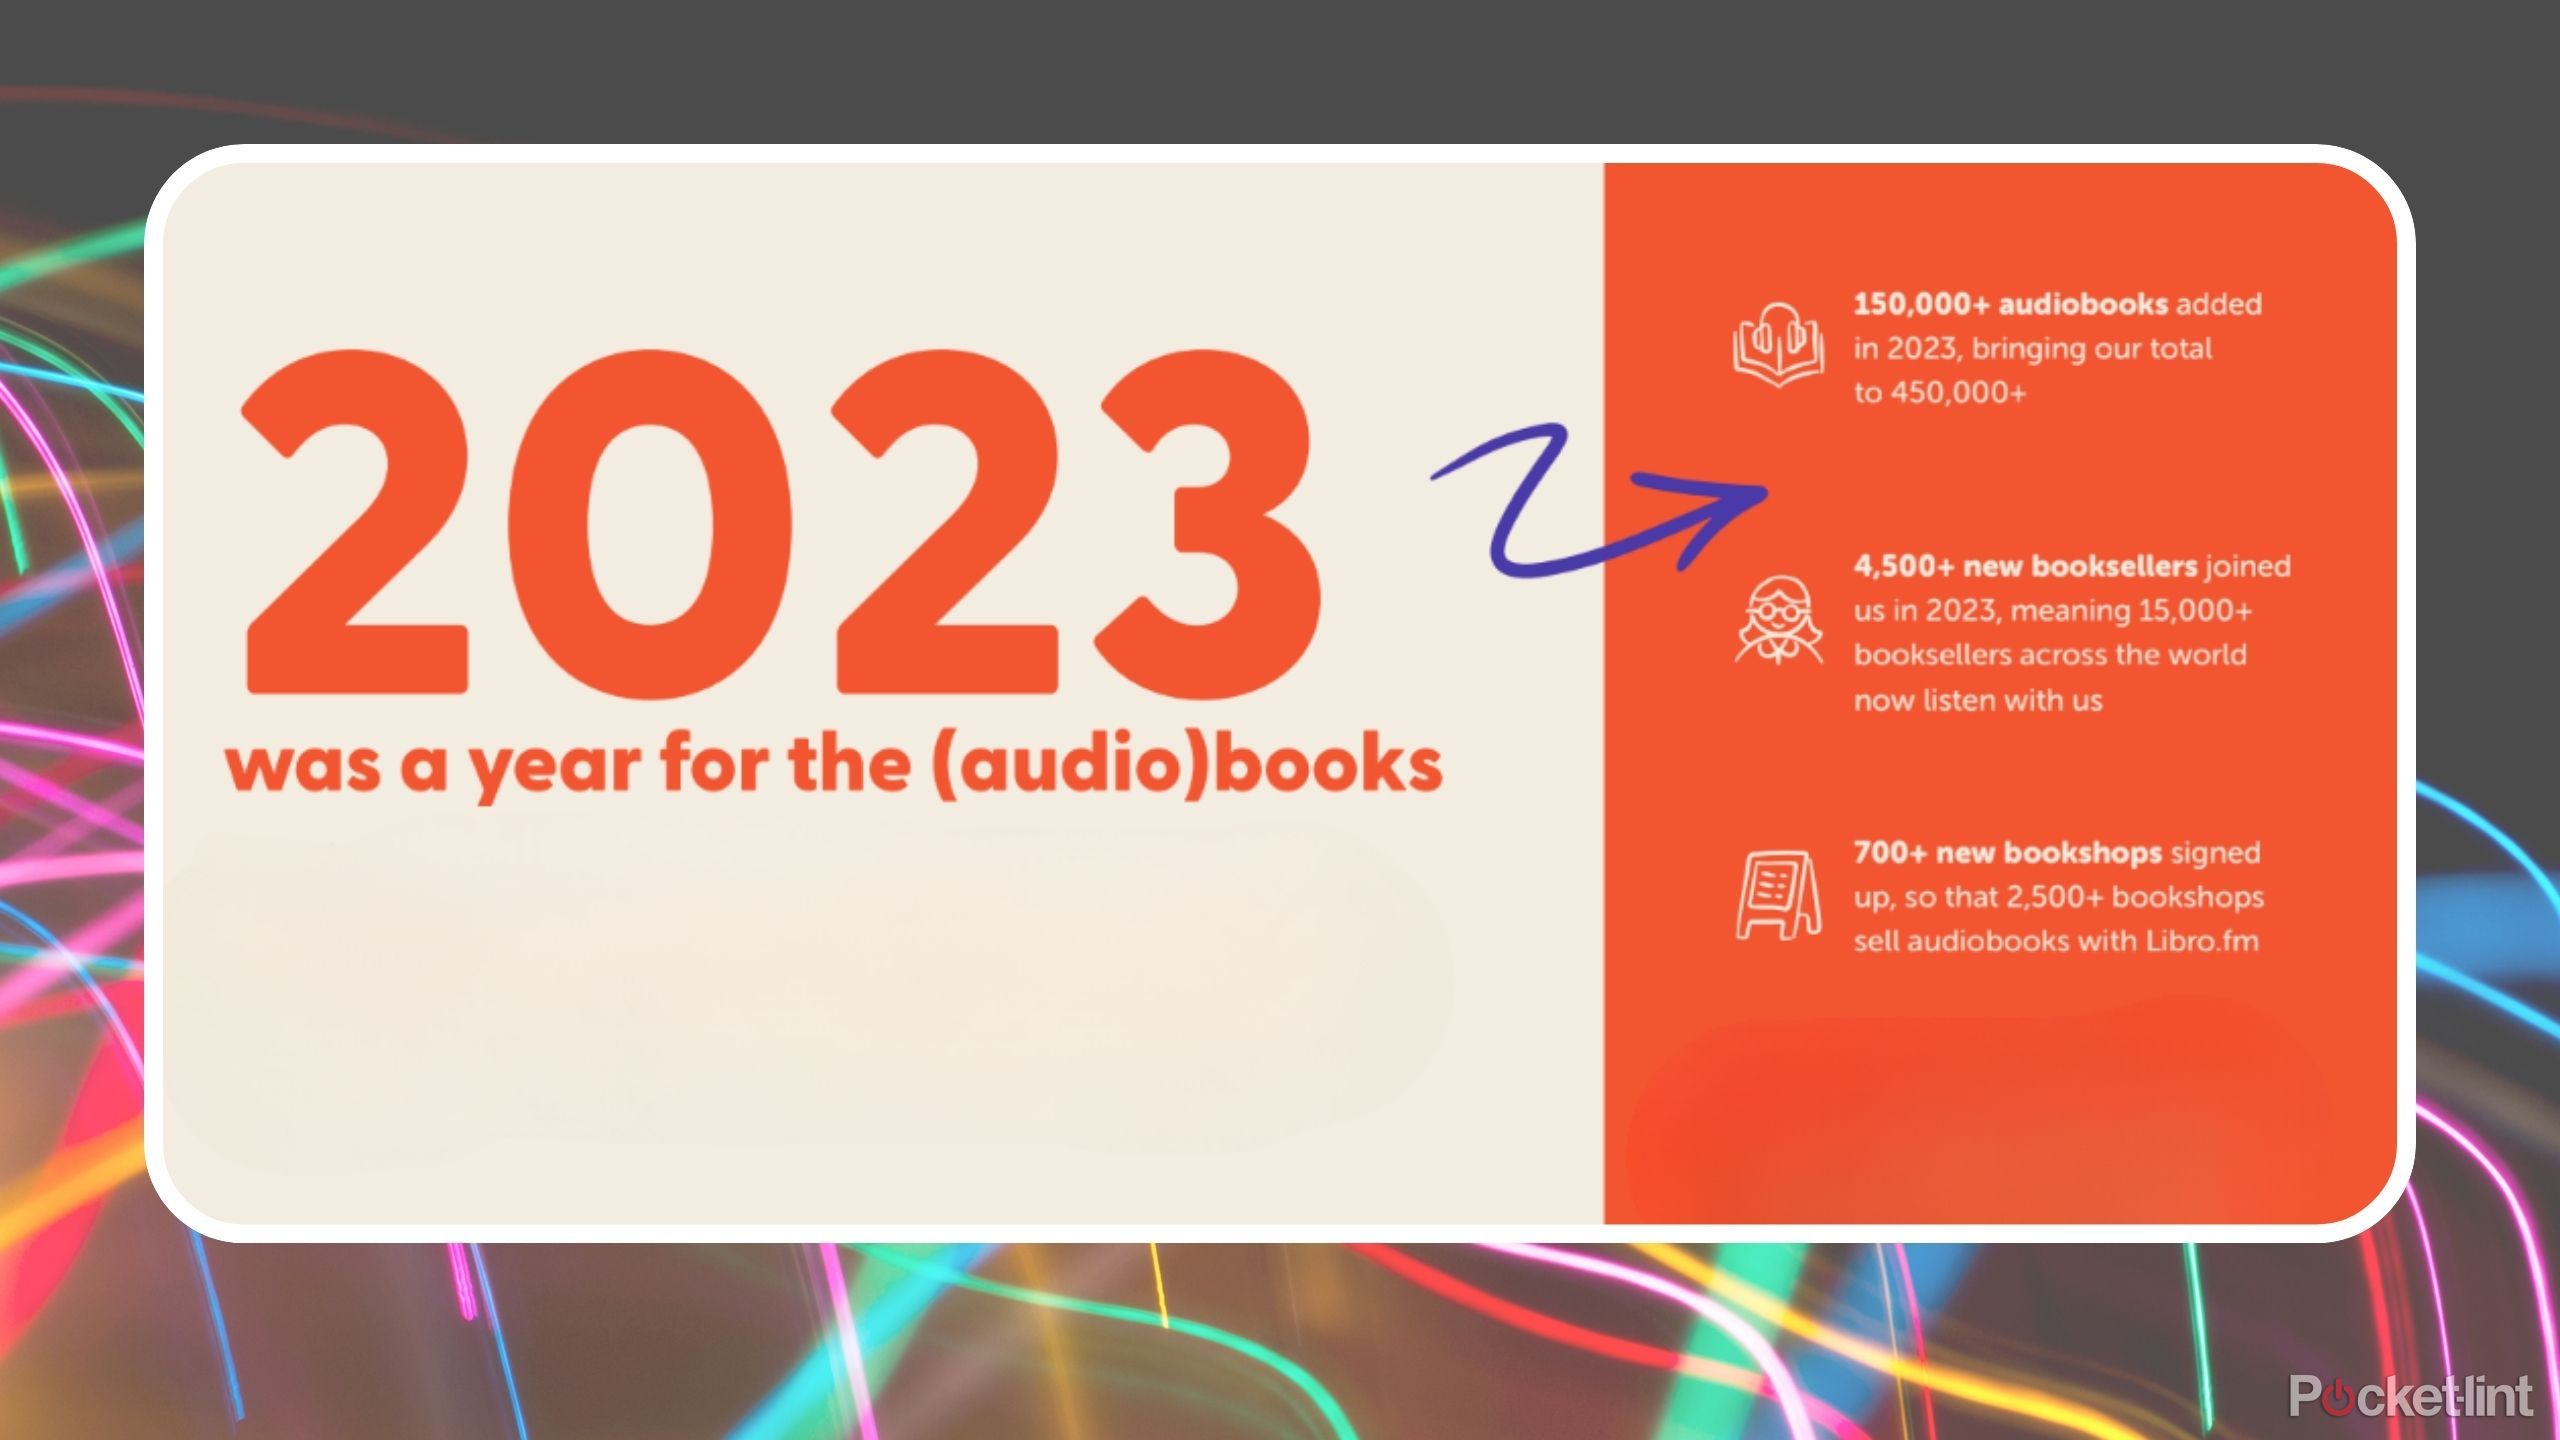 Catalog collection to rival Audible